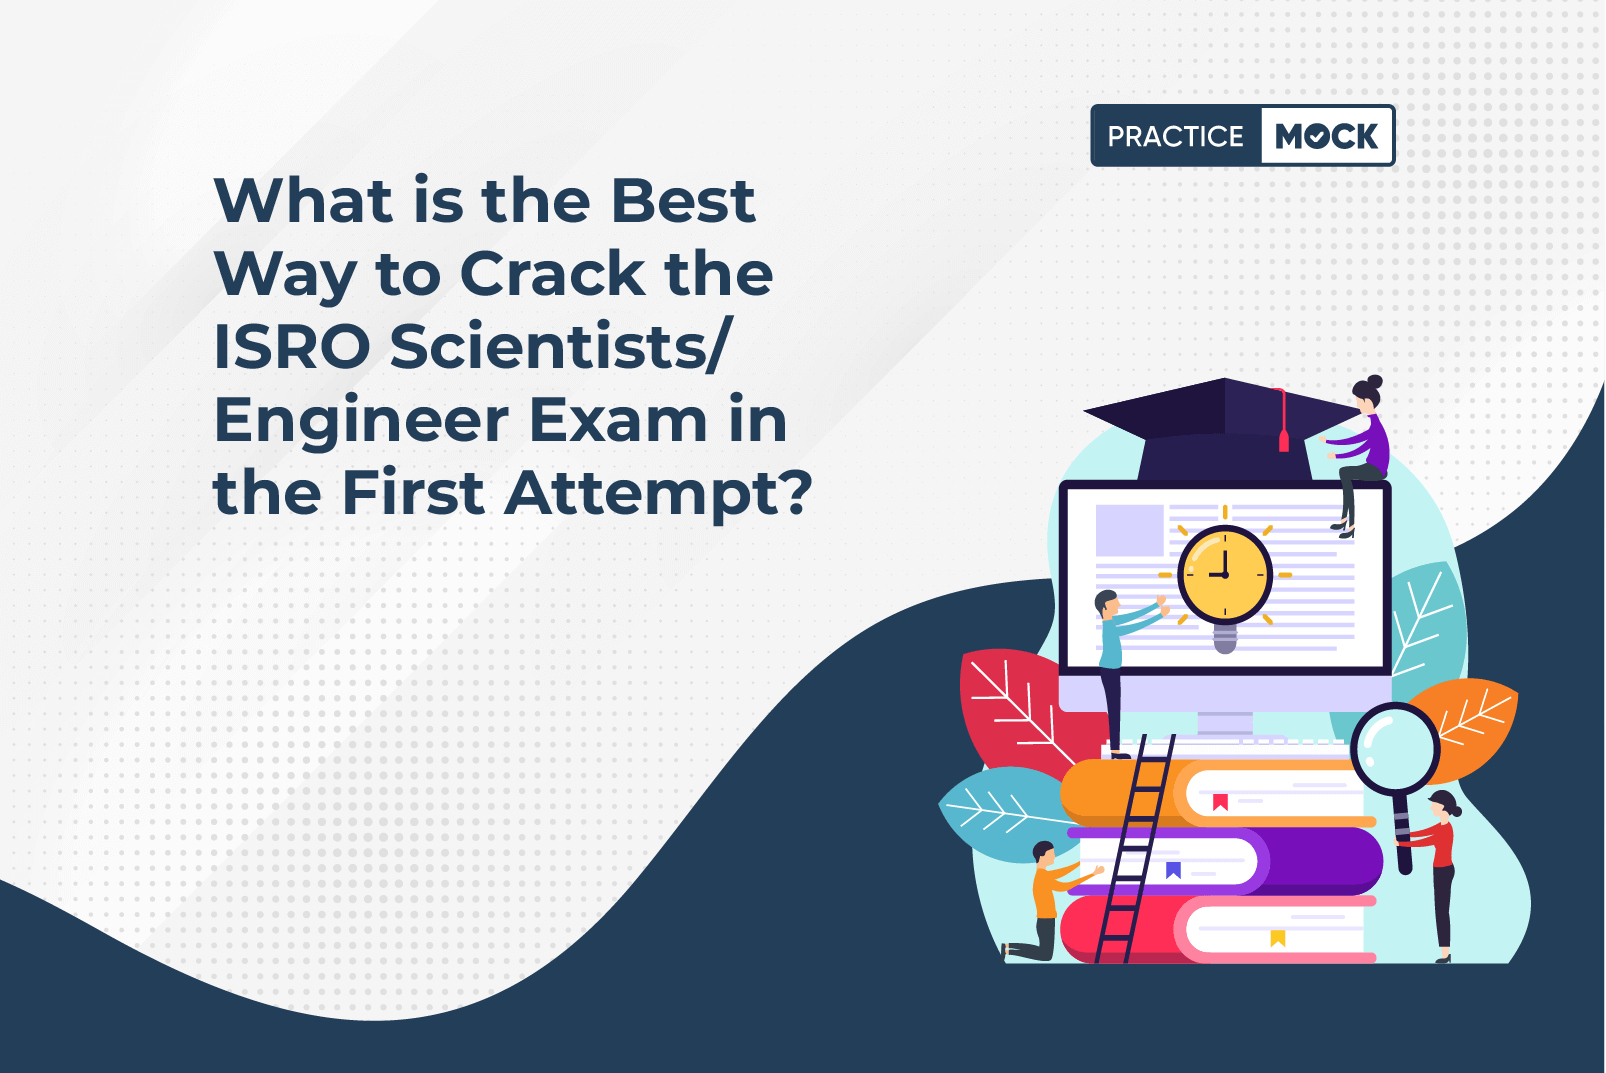 What is the Best Way to Crack the ISRO Scientists/Engineer Exam in the First Attempt?